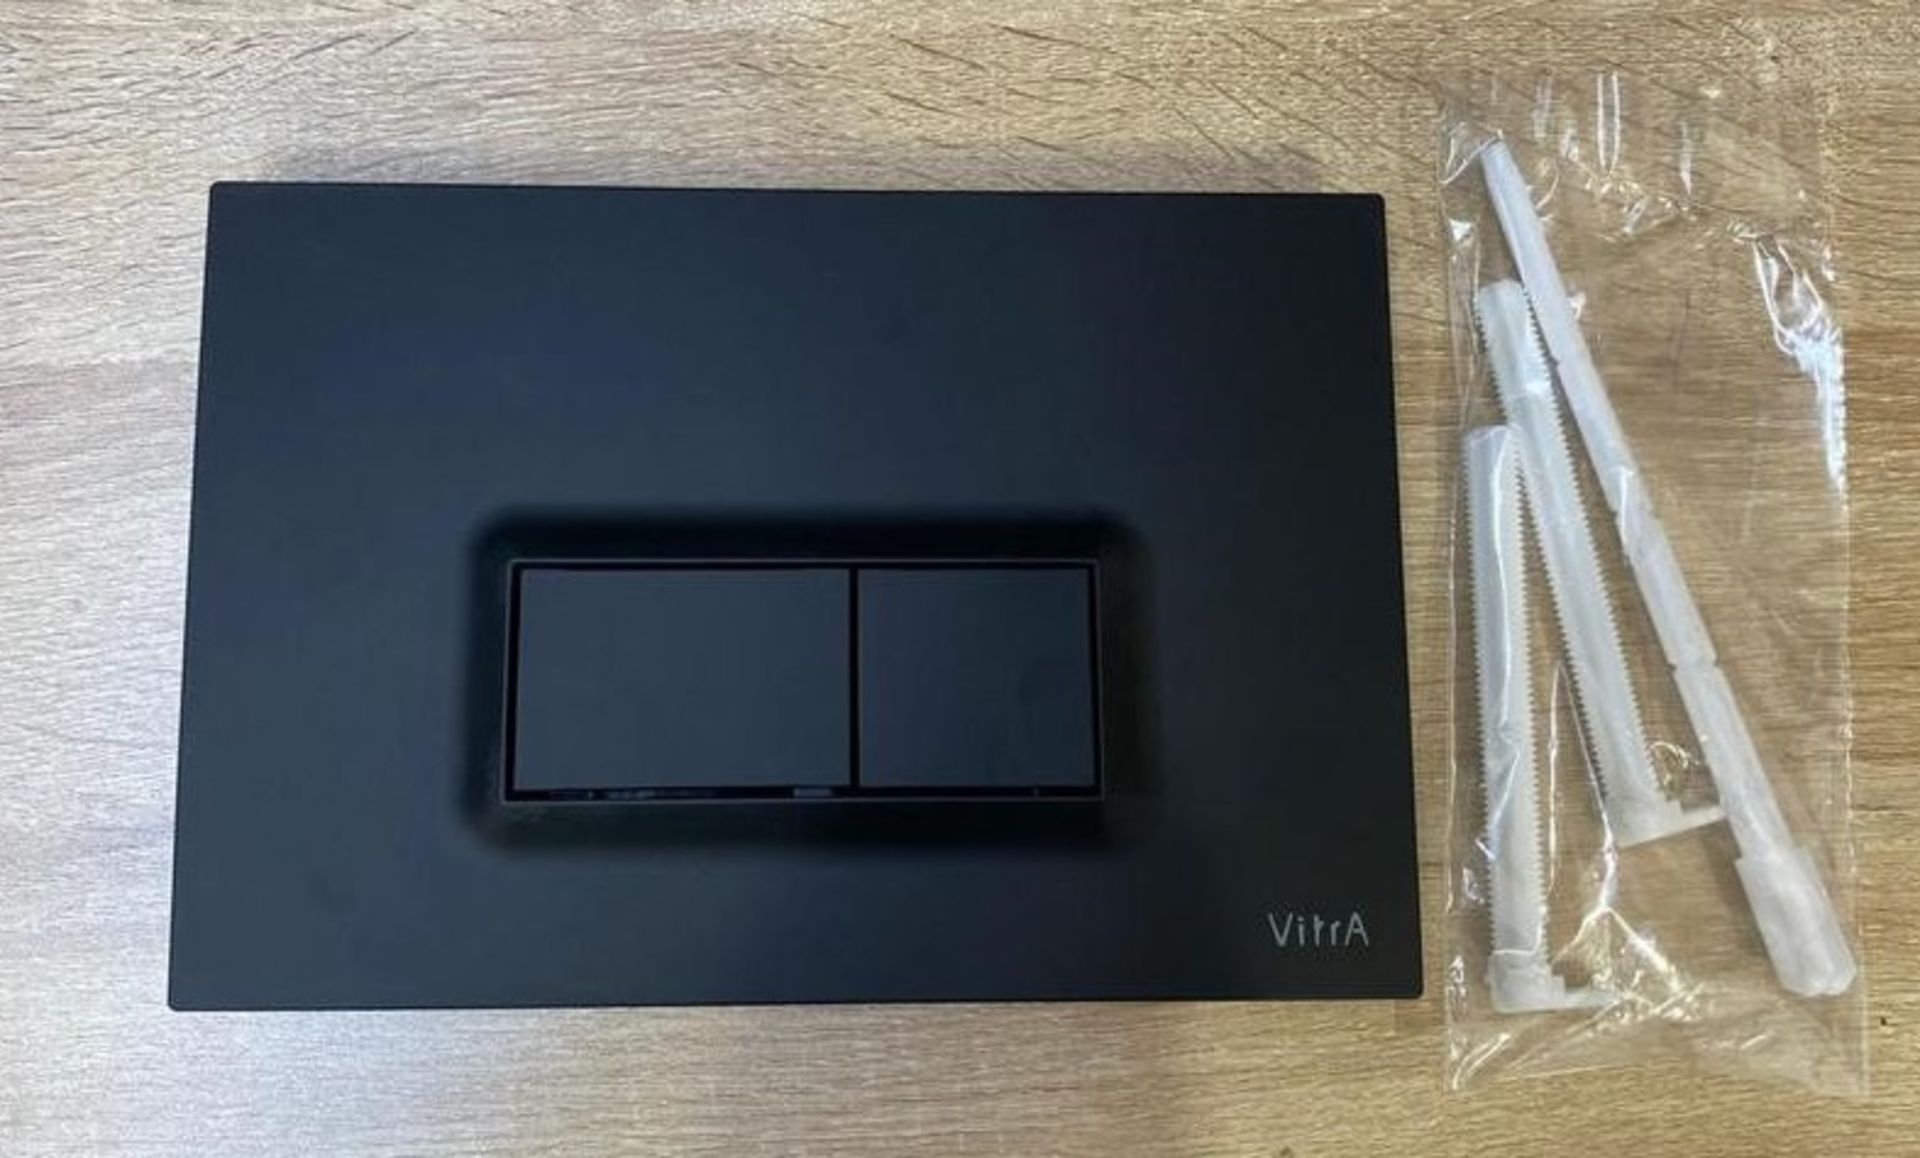 1 x VITRA Control Panel Dual Flush Panel In Black - Product Code: 740-0611 - New Boxed Stock